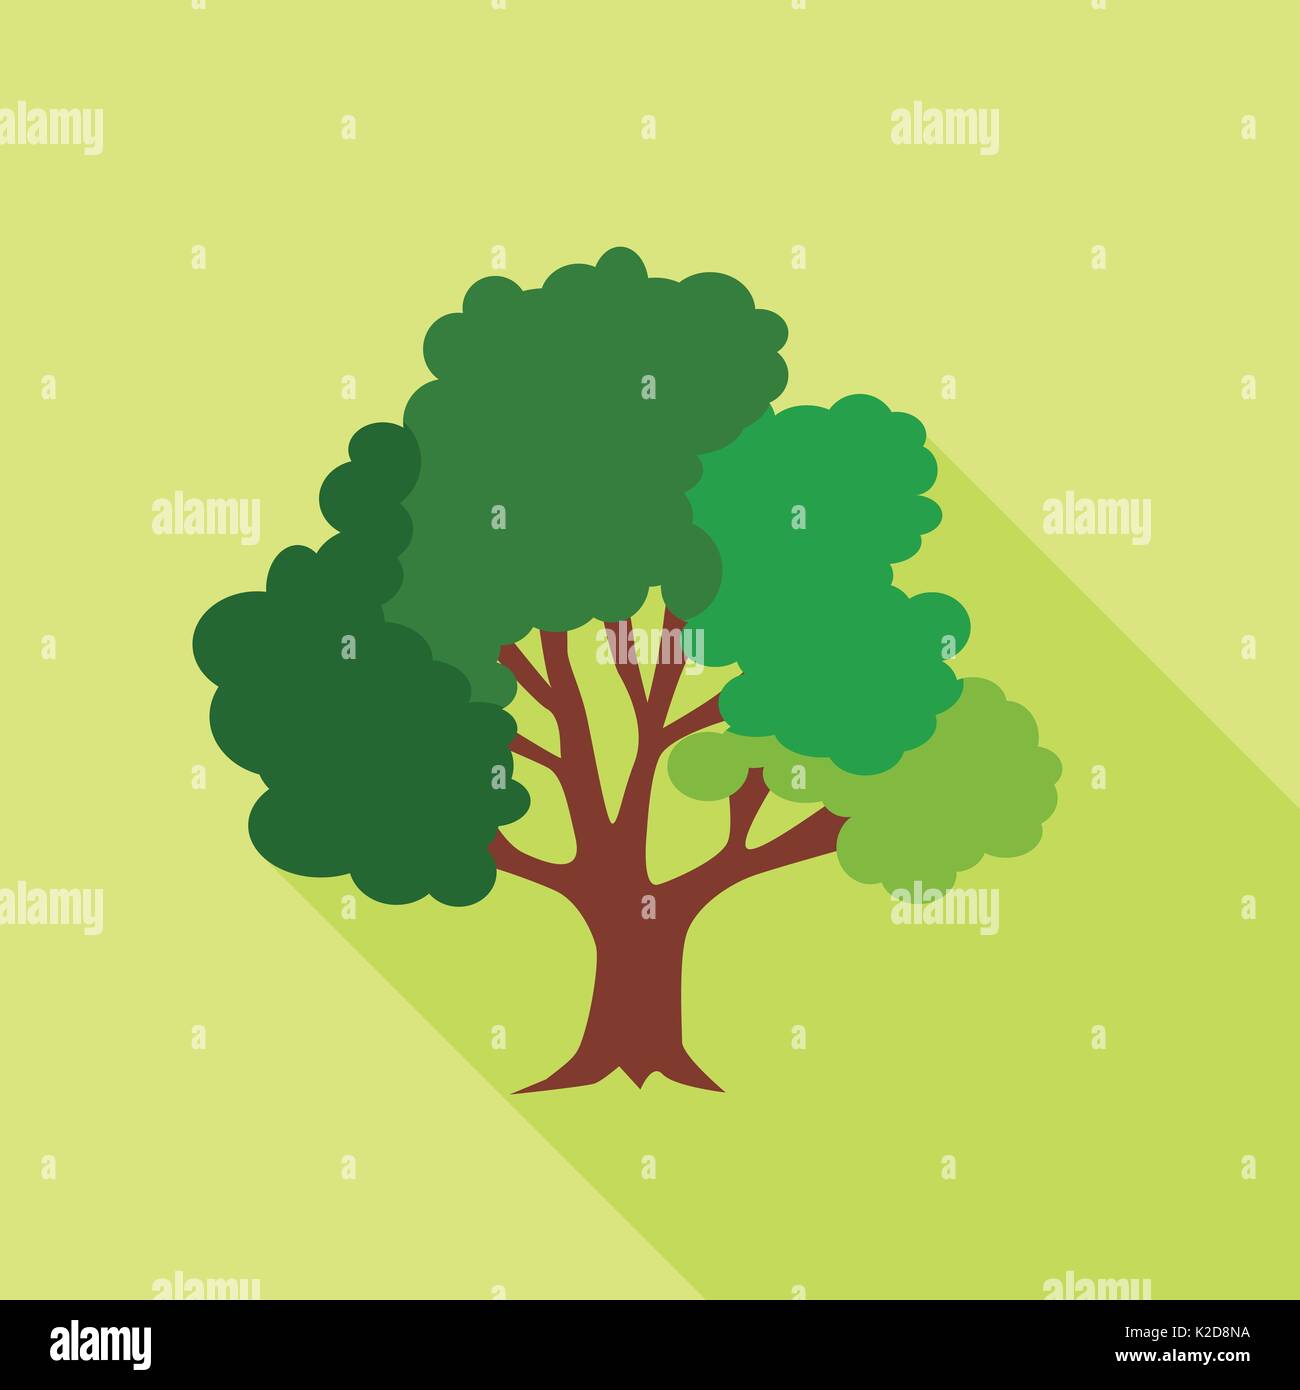 Big fluffy tree icon, flat style Stock Vector